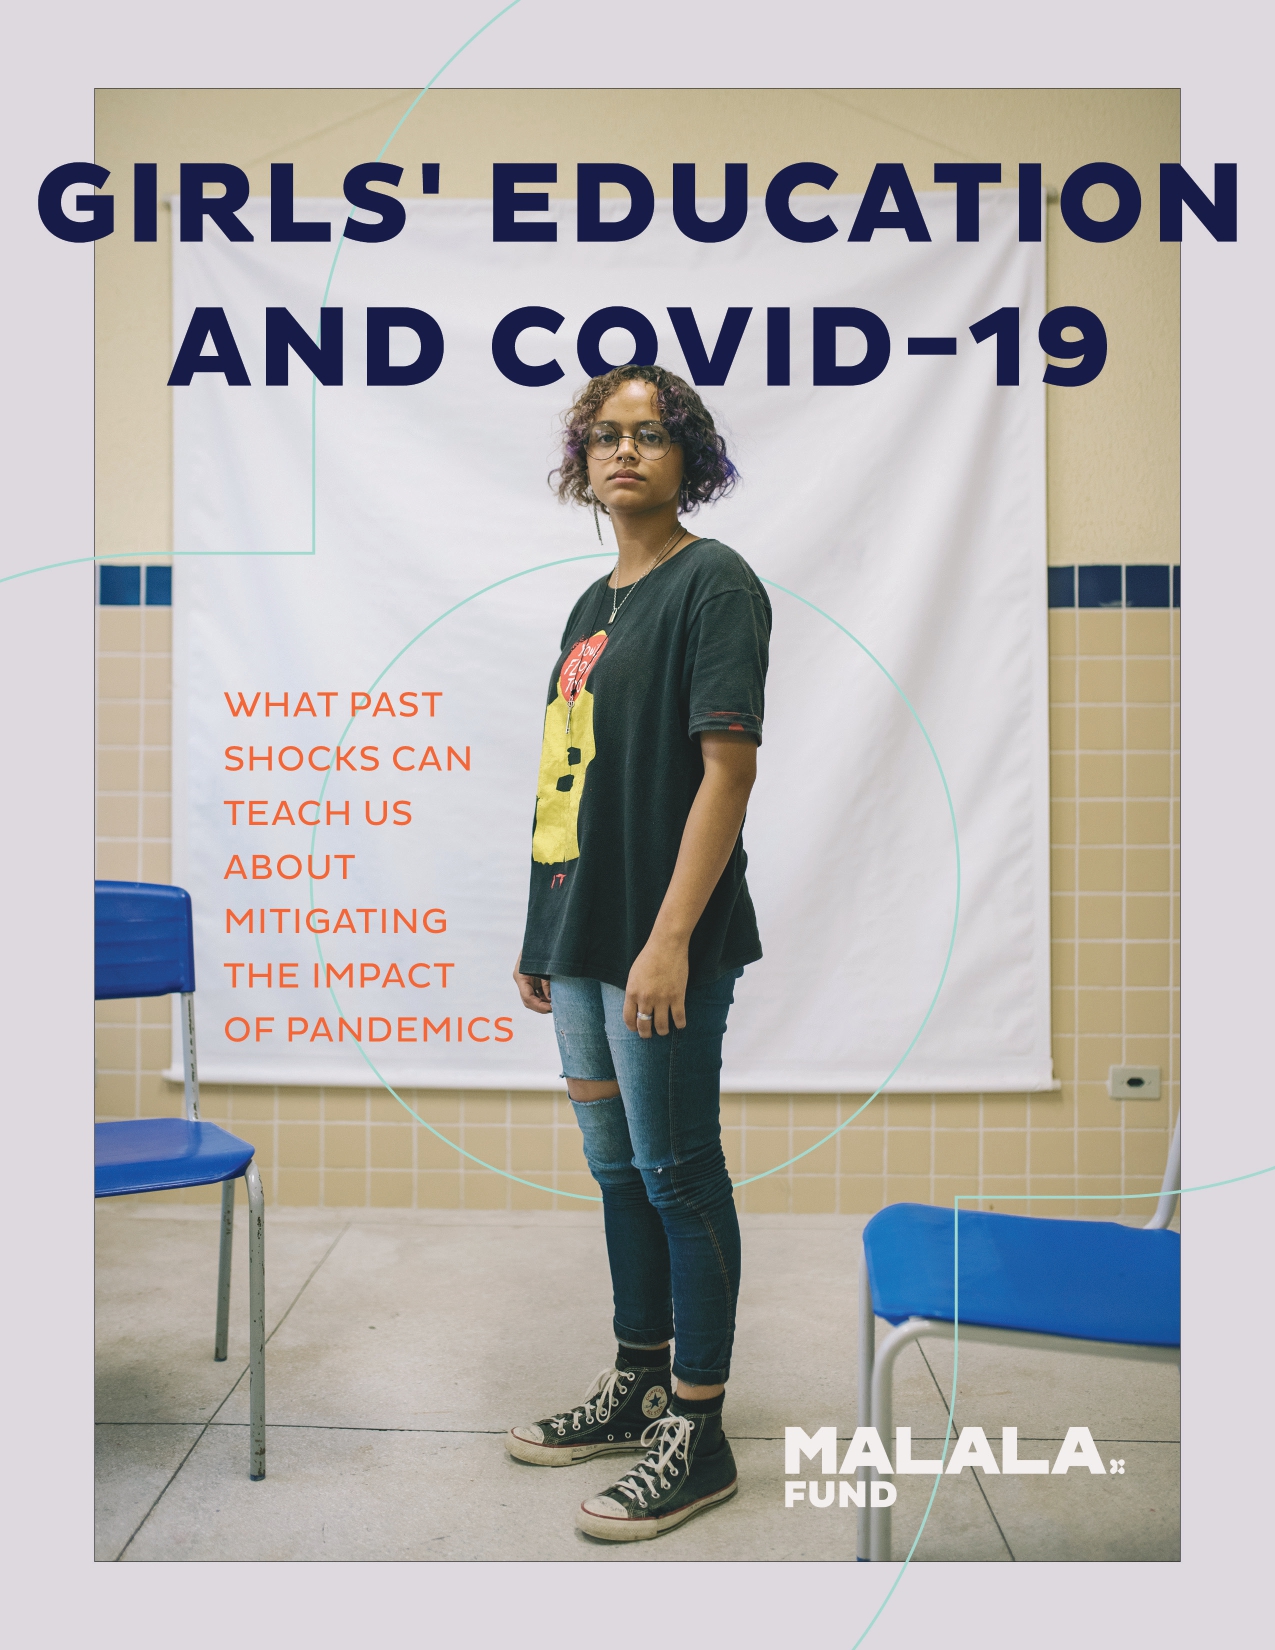  Girls' education and COVID-19: What past shocks can teach us about mitigating the impact of pandemics